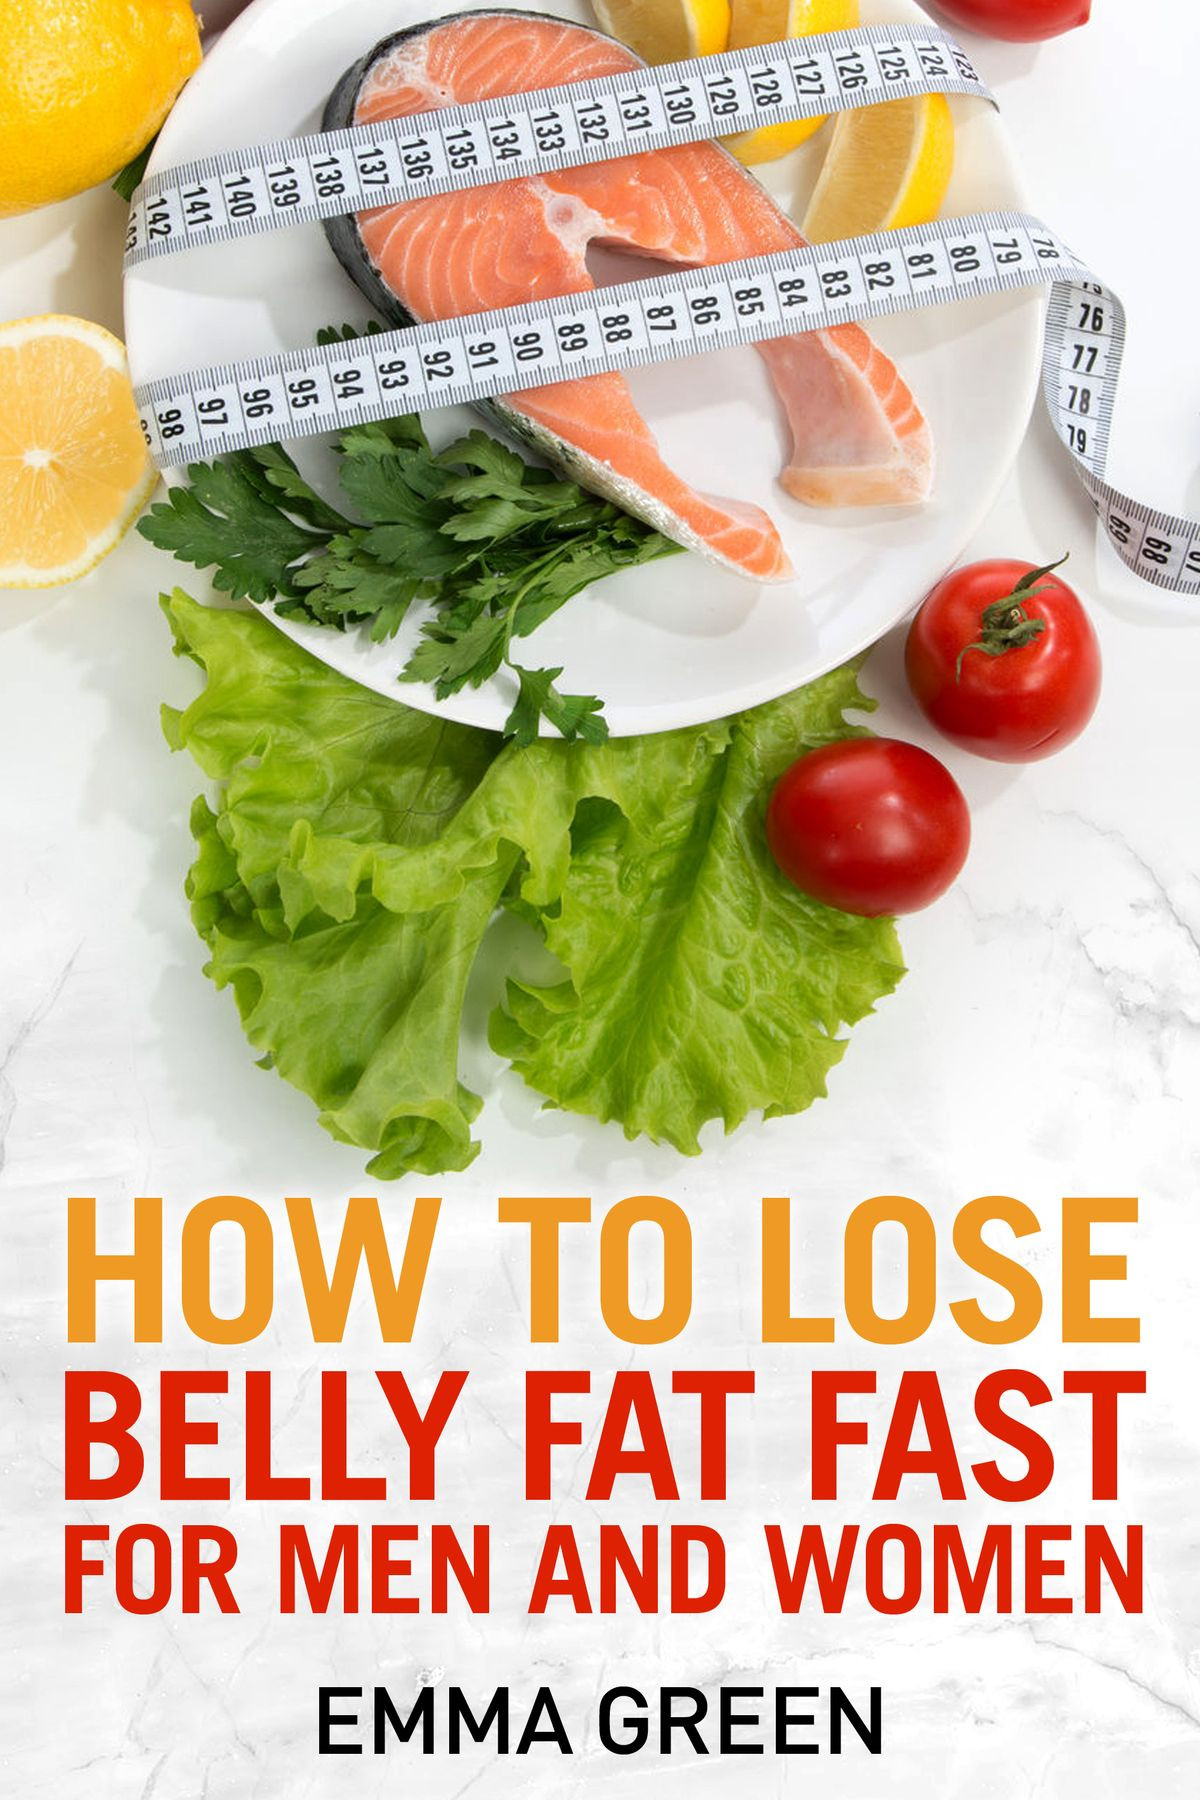 How To Lose Belly Fat Fast Men
 How to Lose Belly Fat Fast For Men and Woman eBook by Emma